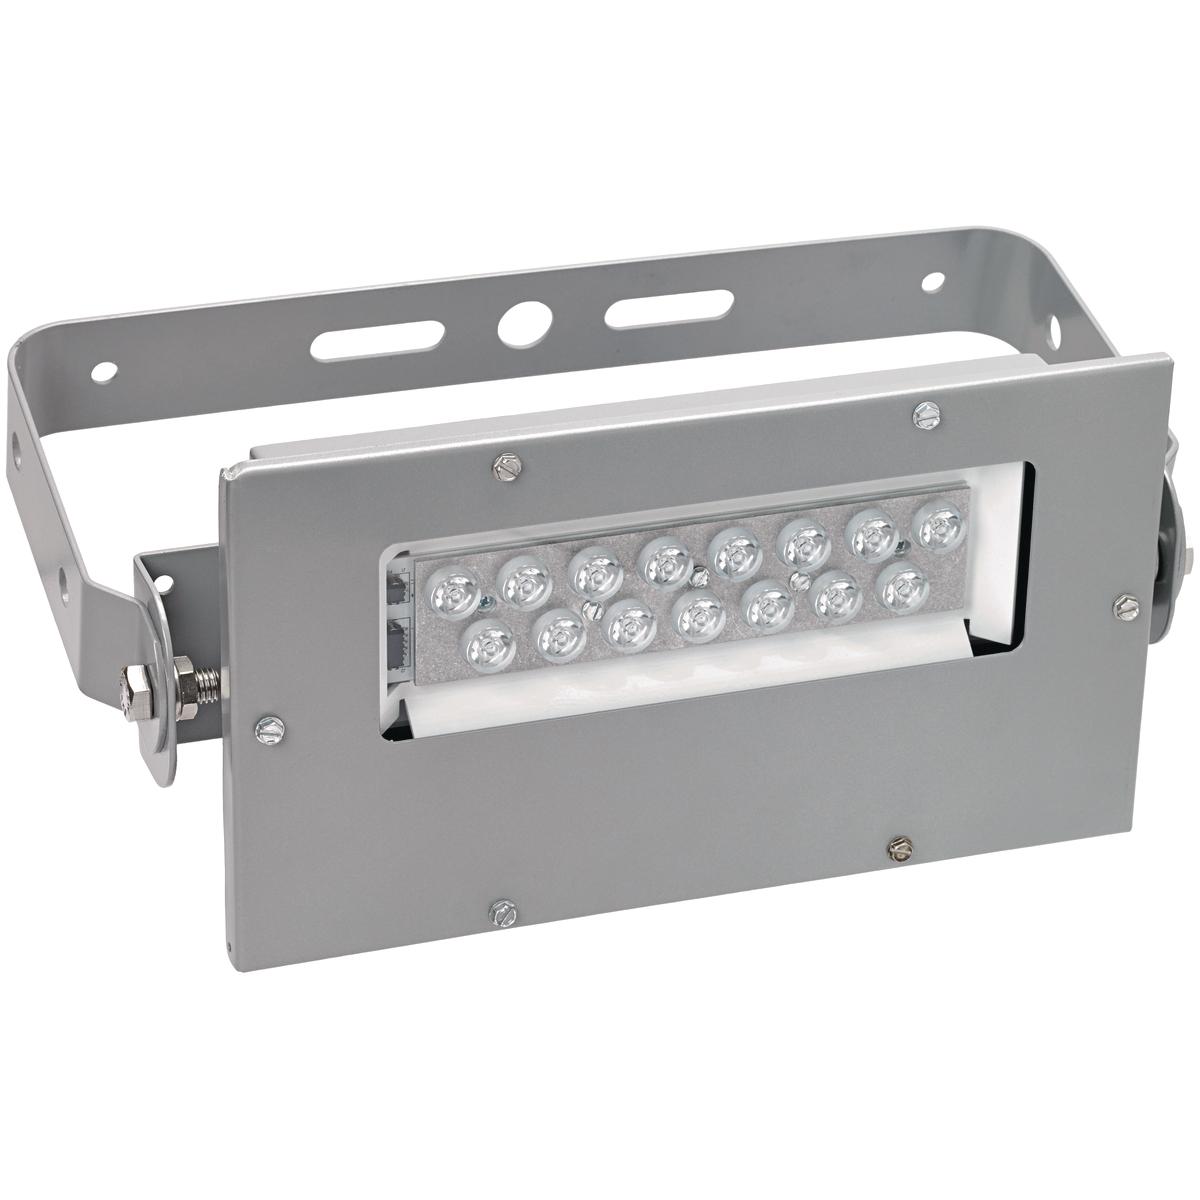 Hubbell KFLC3030 The KFLC Series compact LED floodlights are designed with a copper-free aluminum housing and painted with a powder epoxy finish for superior corrosion resistance in harsh and hazardous environments. Killark LED floodlights provide a crisp white light that